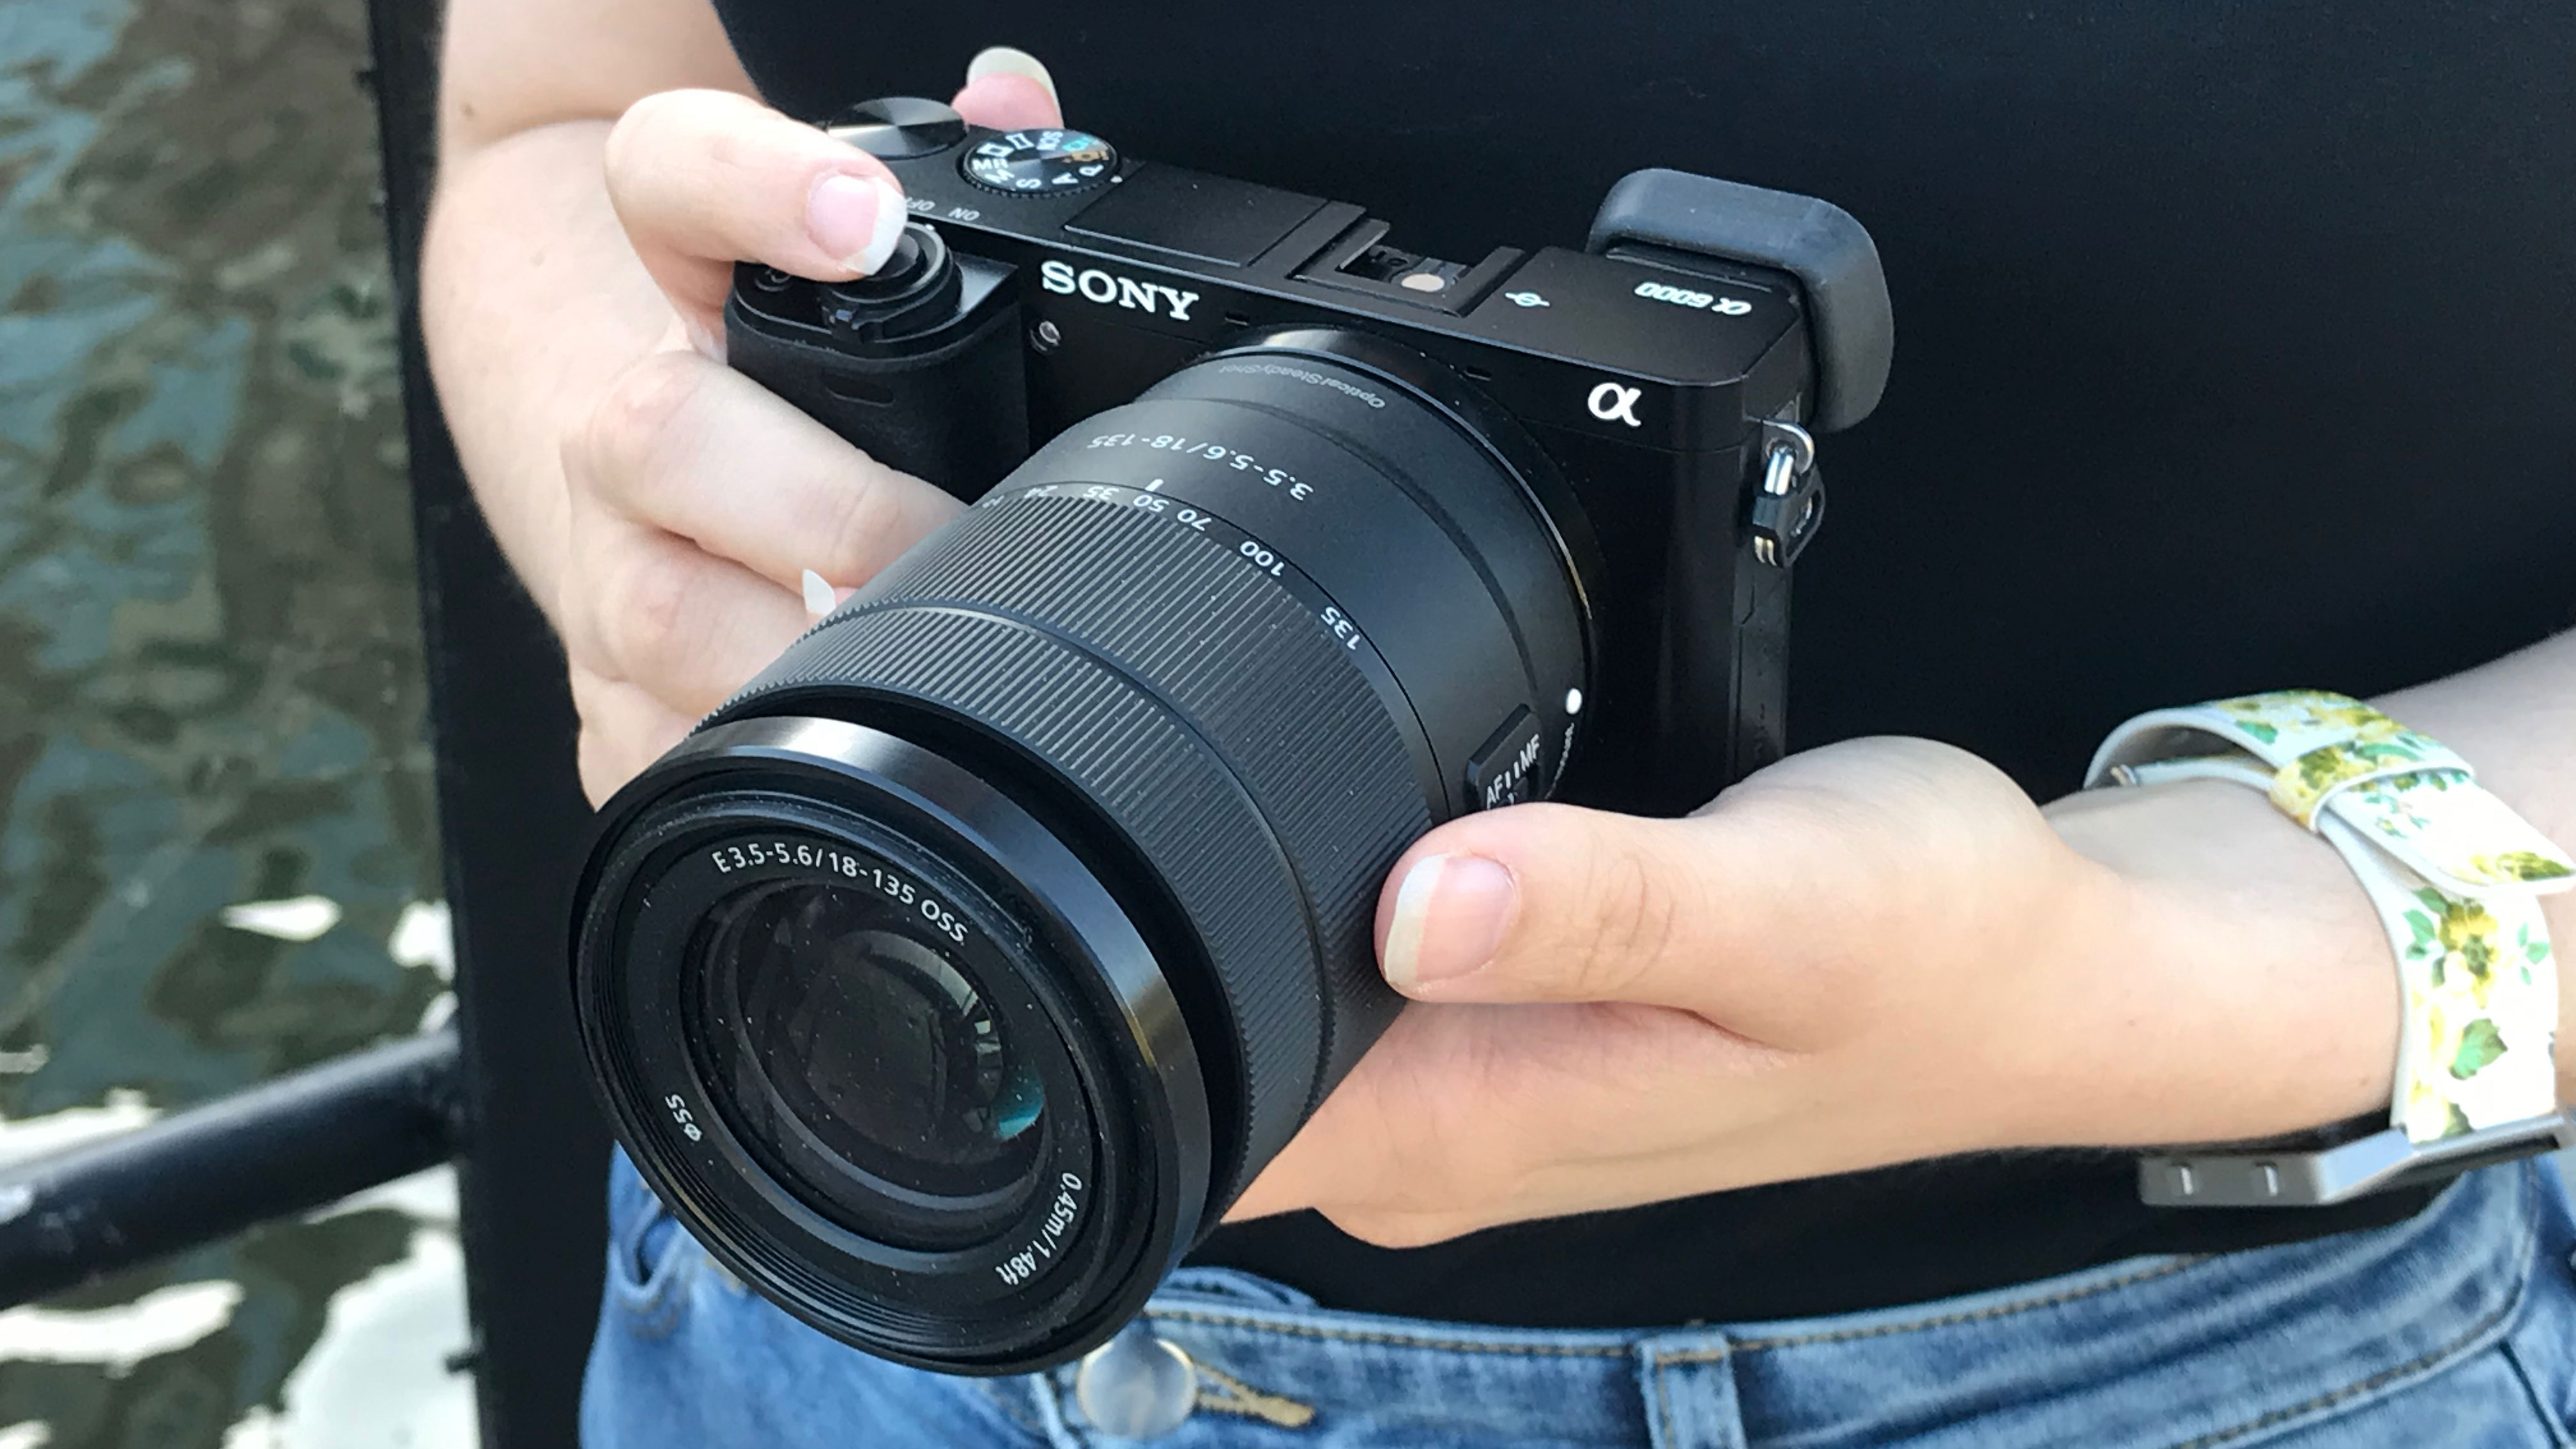 Sony Alpha A6400 Mirrorless Camera with 18-135mm Lens with Fe 50mm F1.8 Lens SEL50F18F/2 